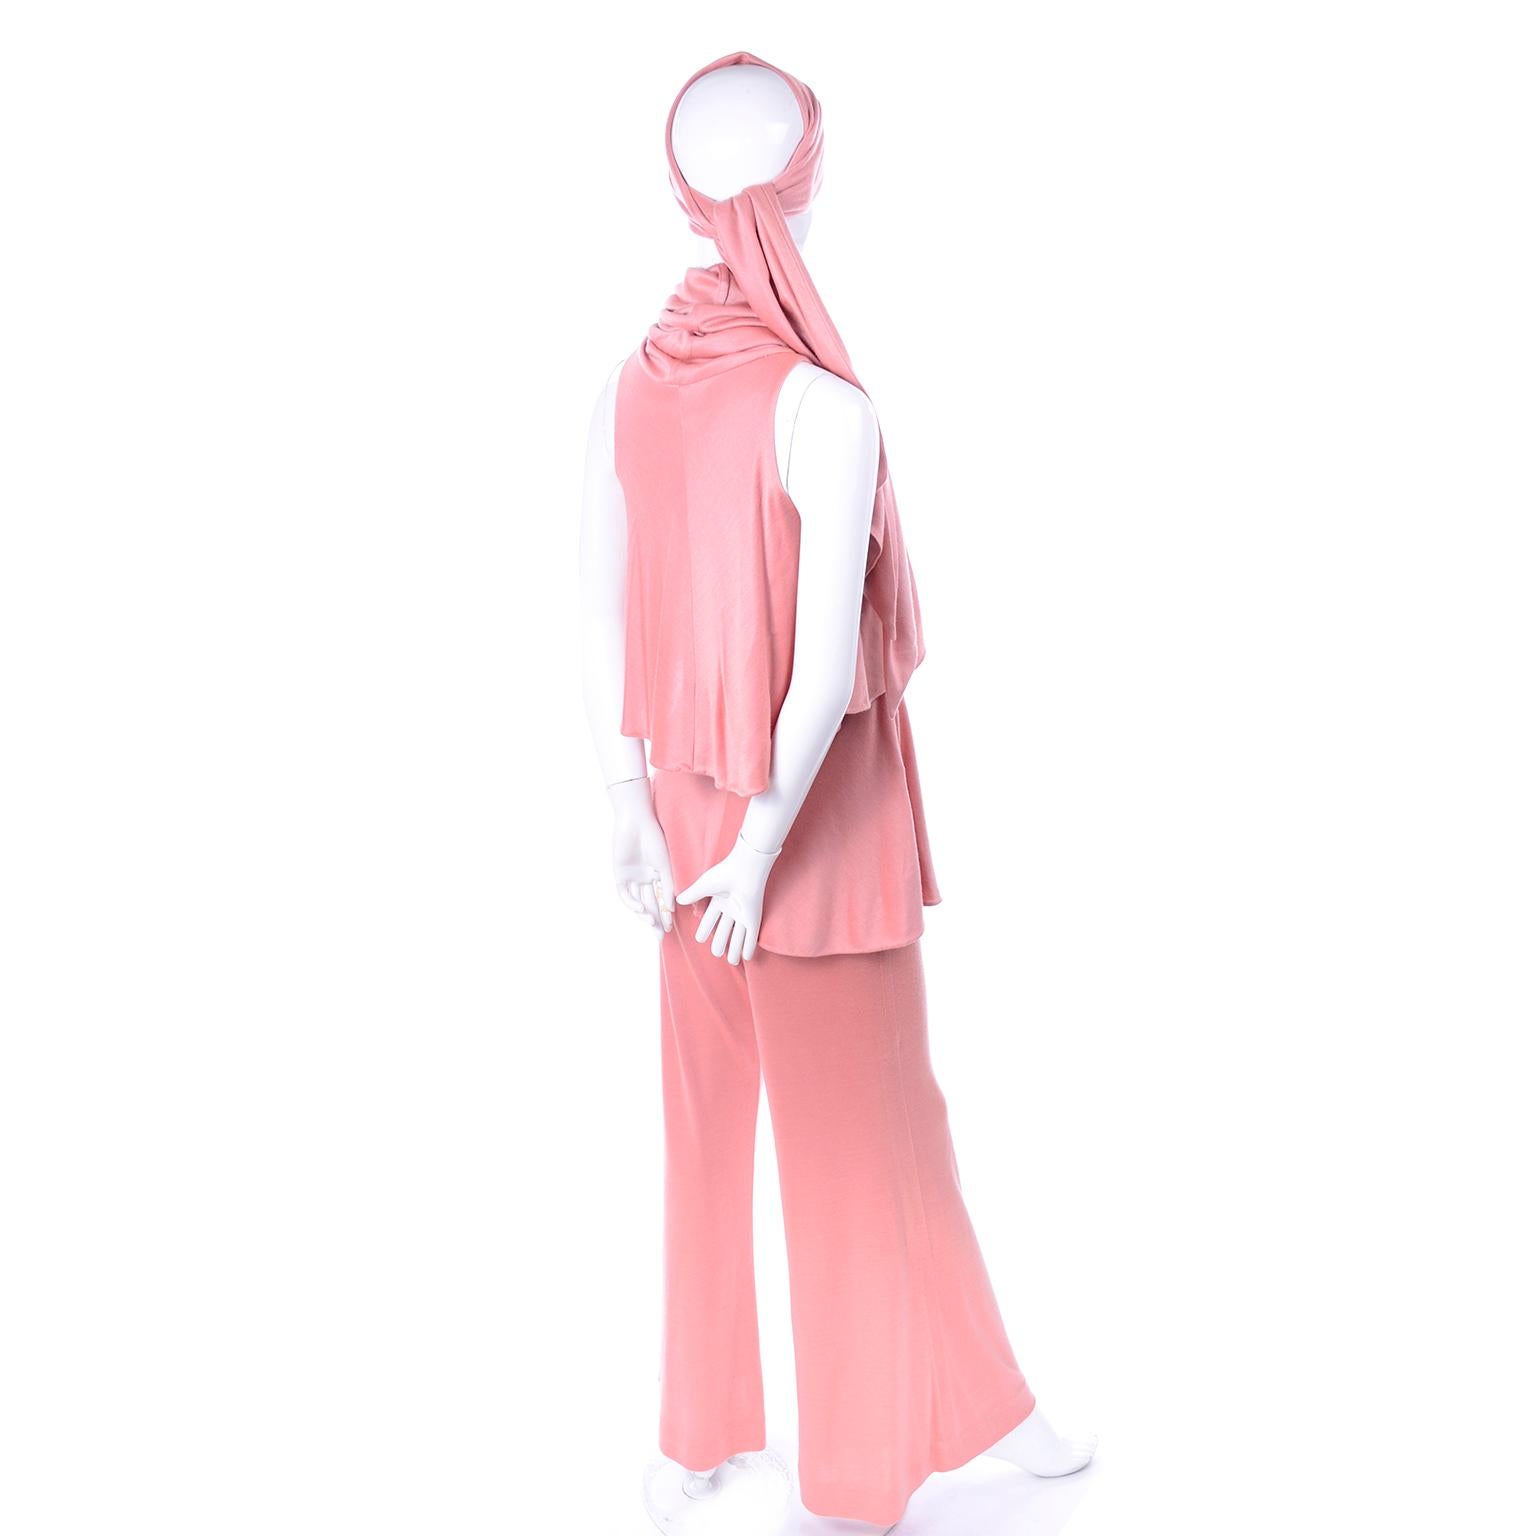 Women's Adri Mary Adrienne Steckling Coen Vintage Coral Pink Outfit W Pants Top & Scarf